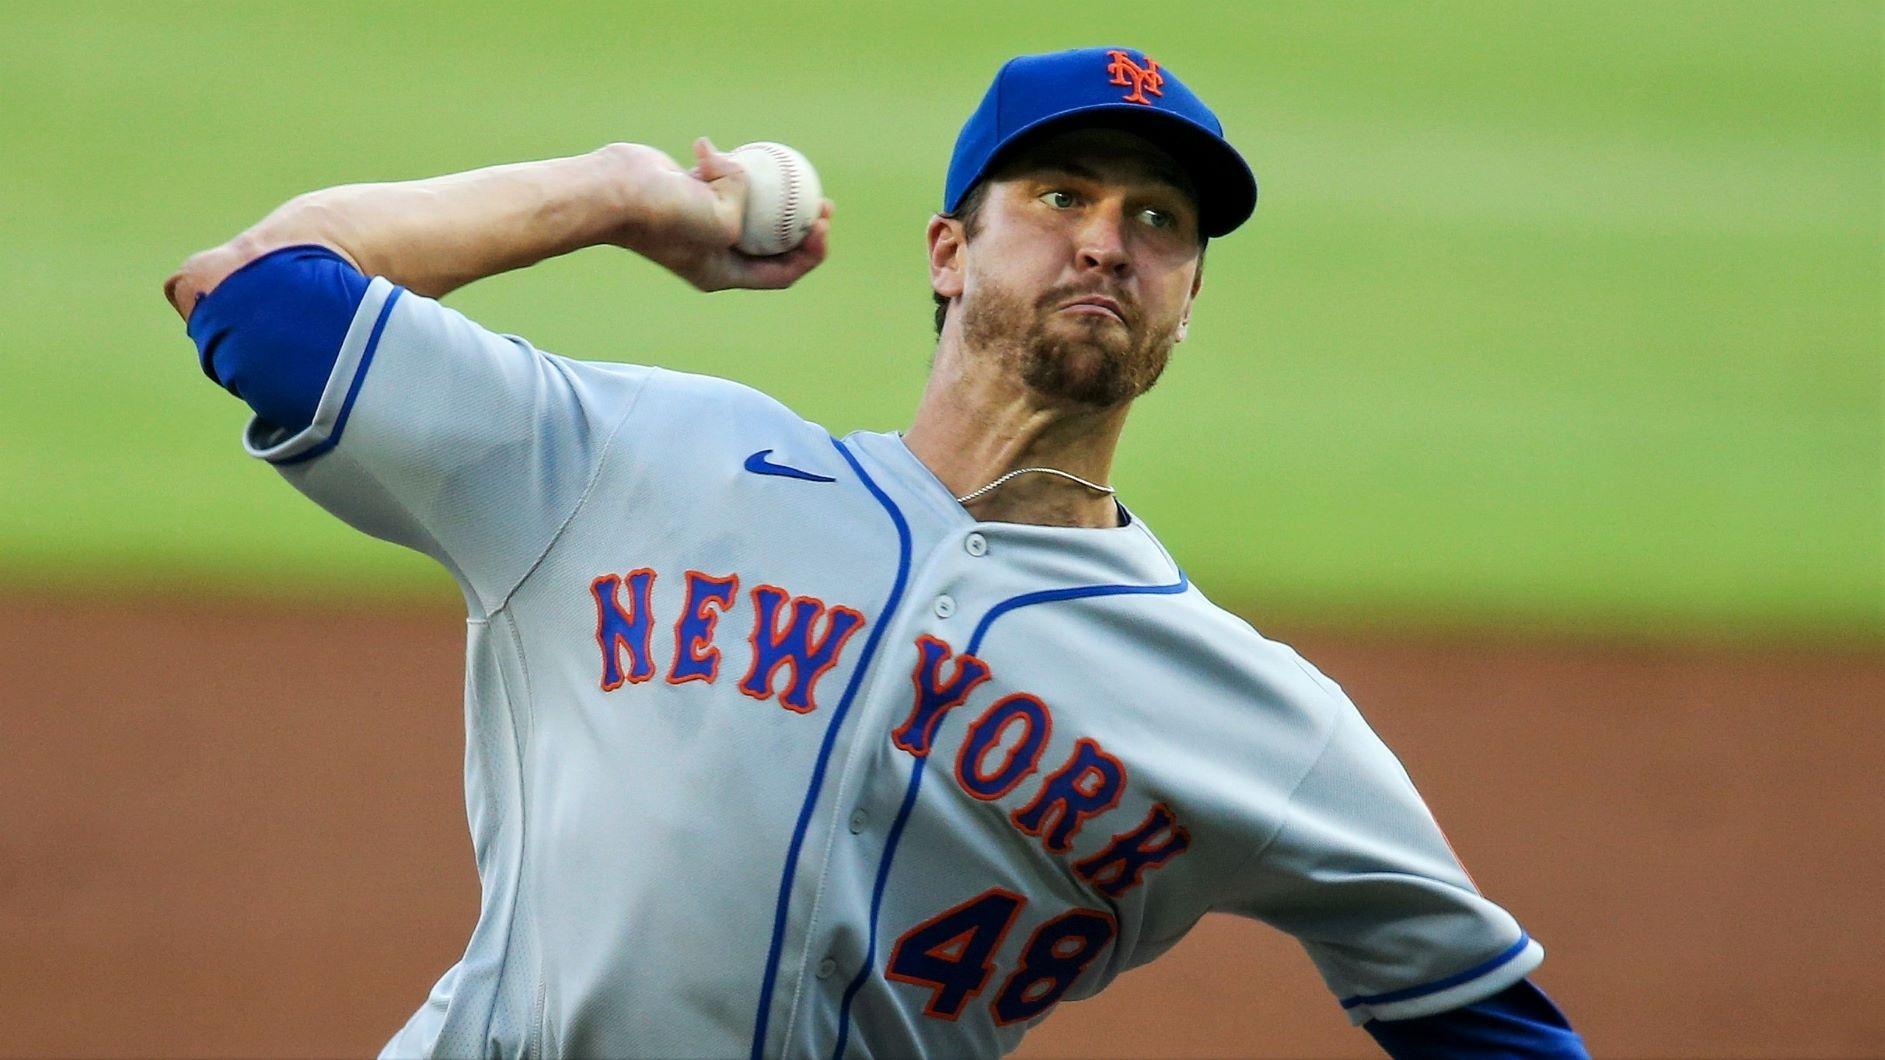 Aug 3, 2020; Atlanta, Georgia, USA; New York Mets starting pitcher Jacob deGrom (48) throws against the Atlanta Braves in the second inning at Truist Park. / Brett Davis-USA TODAY Sports